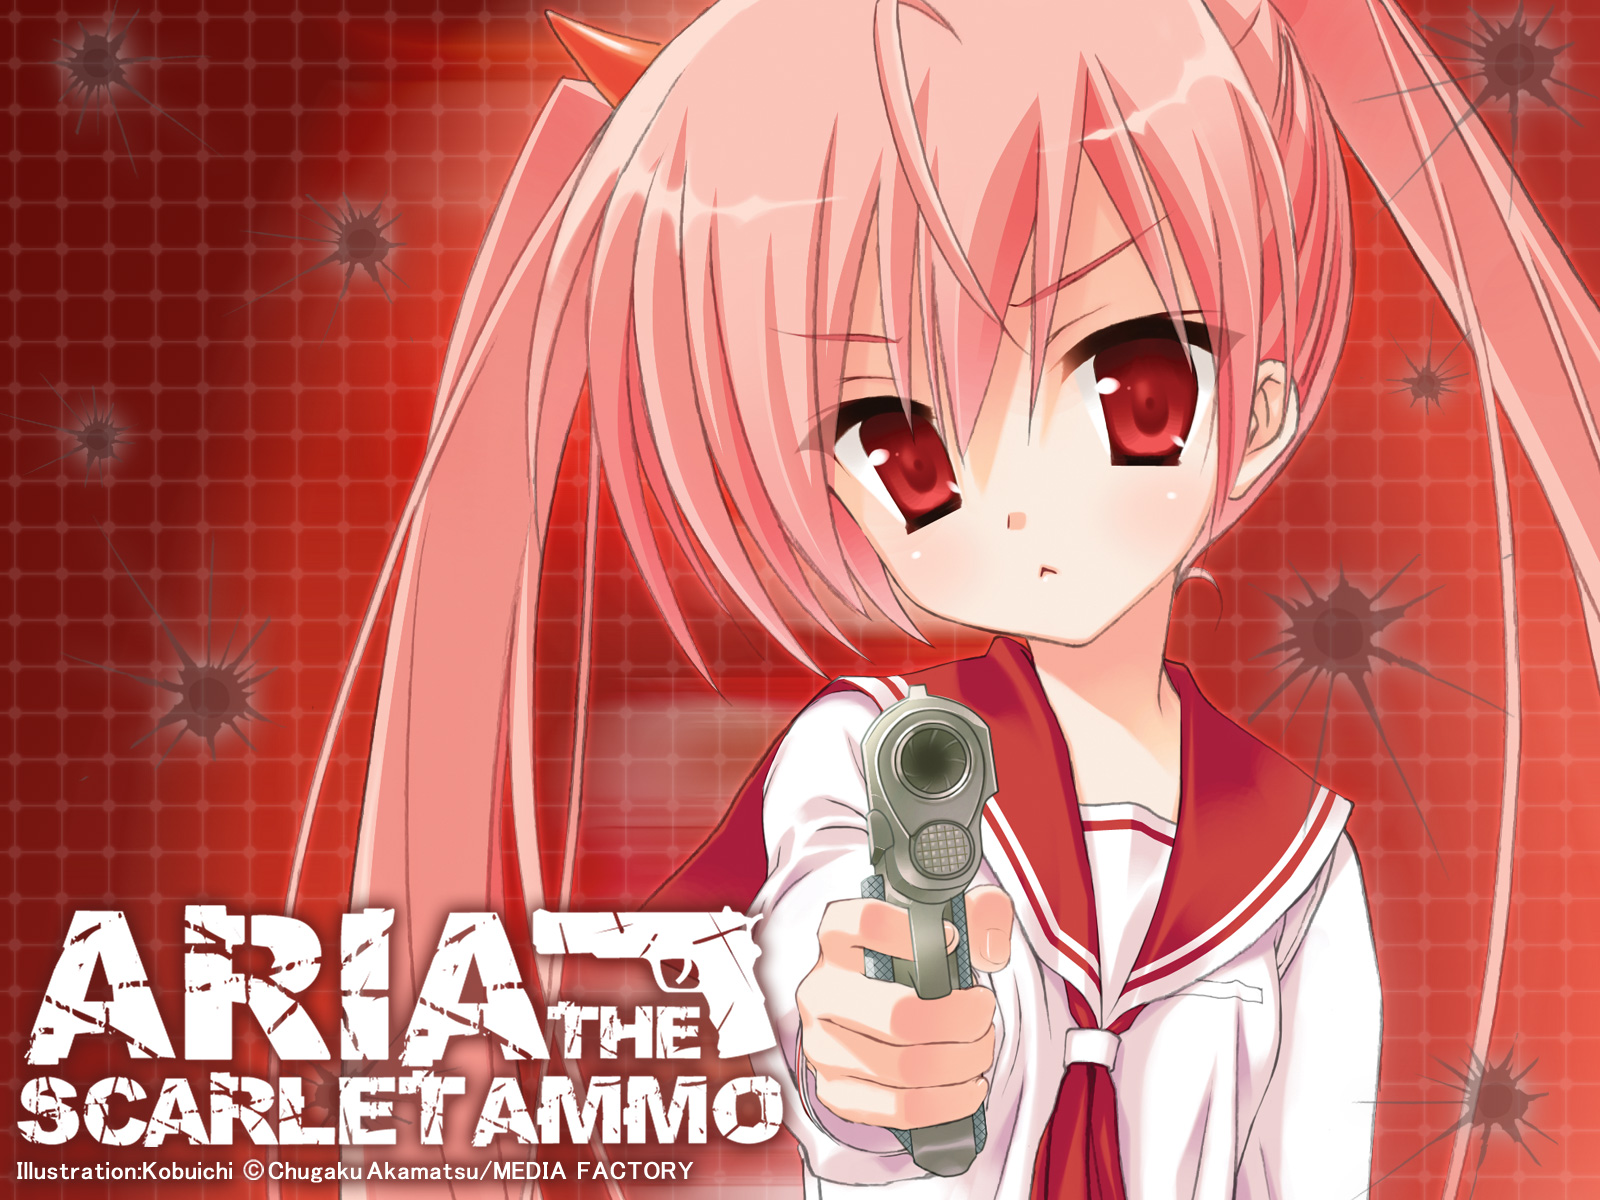 Anime Aria The Scarlet Ammo HD Wallpaper | Background Image